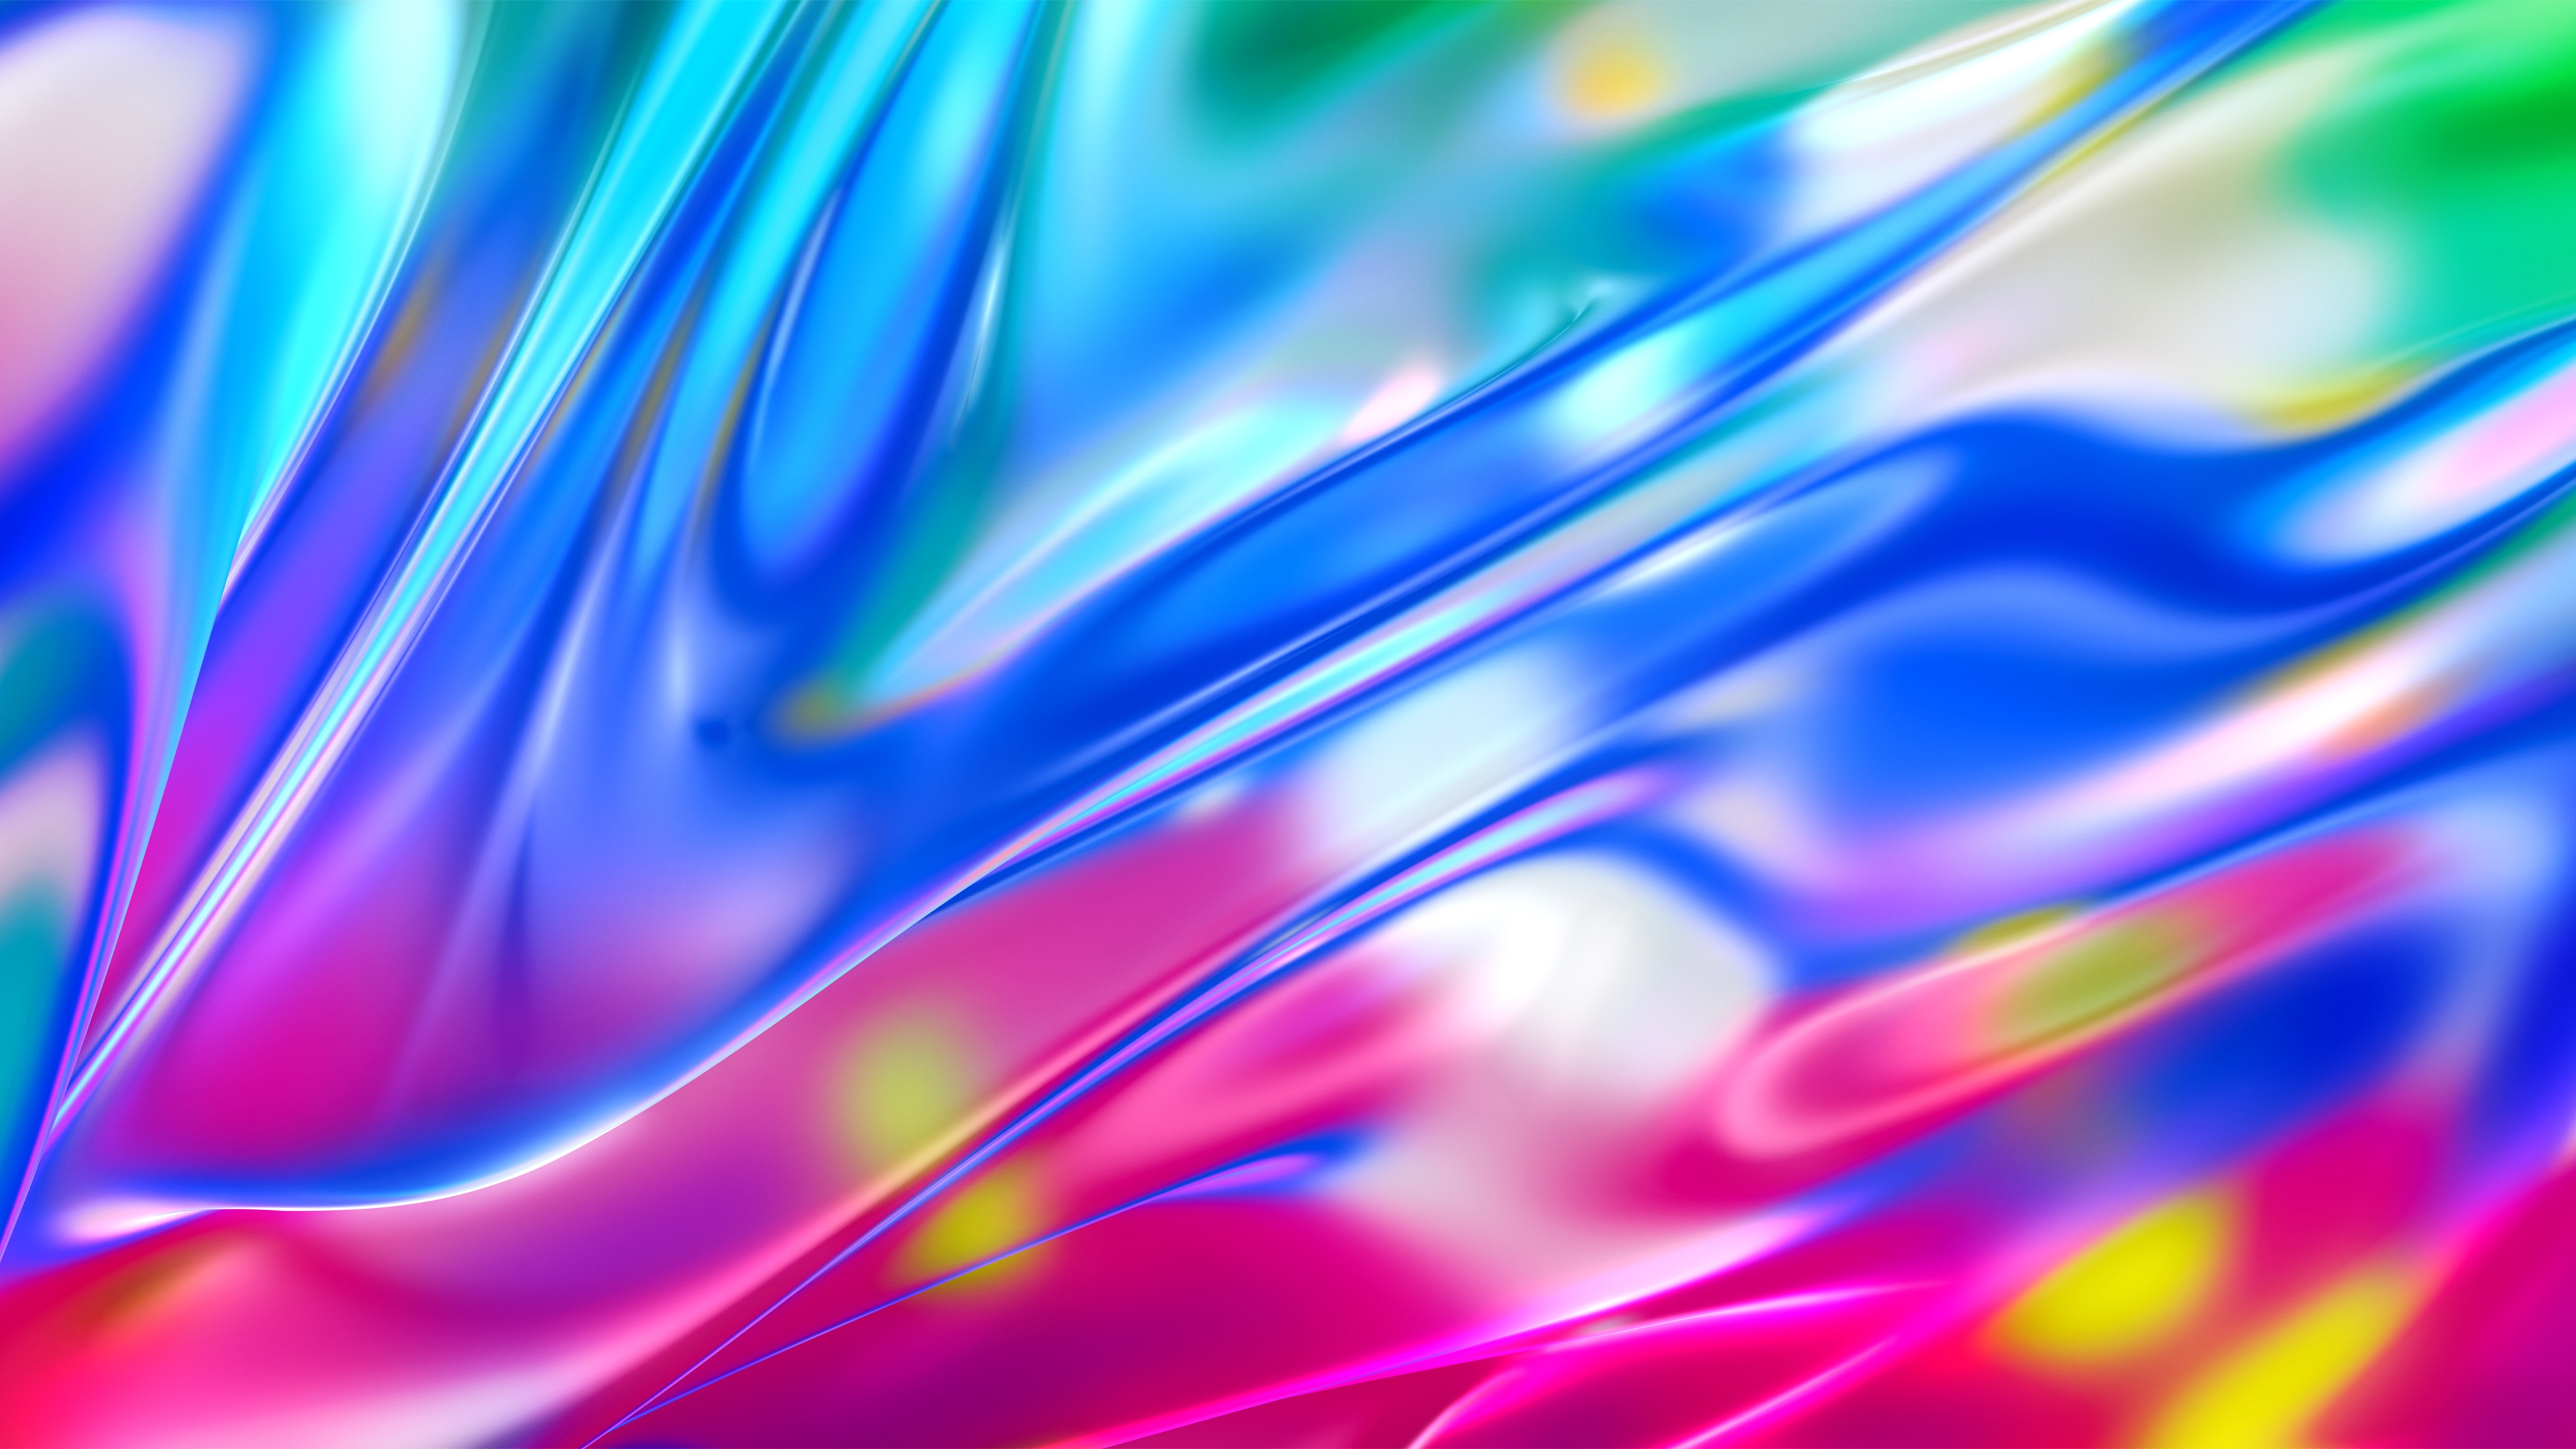 HD wallpaper, Psychedelic, Chromatic, Silk, 3D, Colorful Gradients